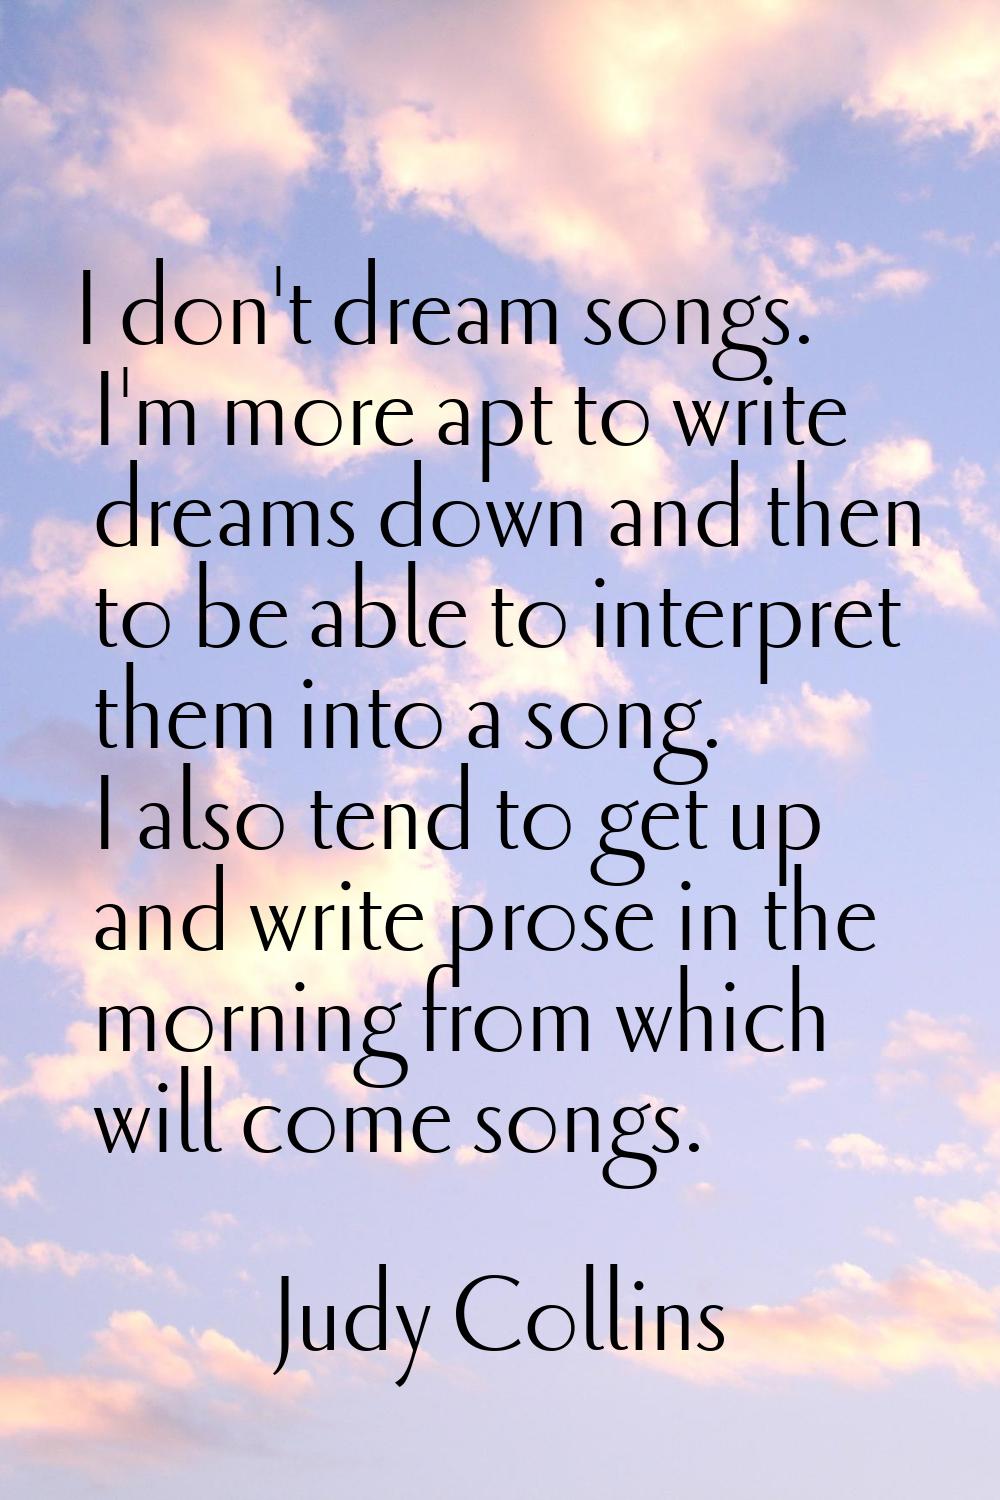 I don't dream songs. I'm more apt to write dreams down and then to be able to interpret them into a